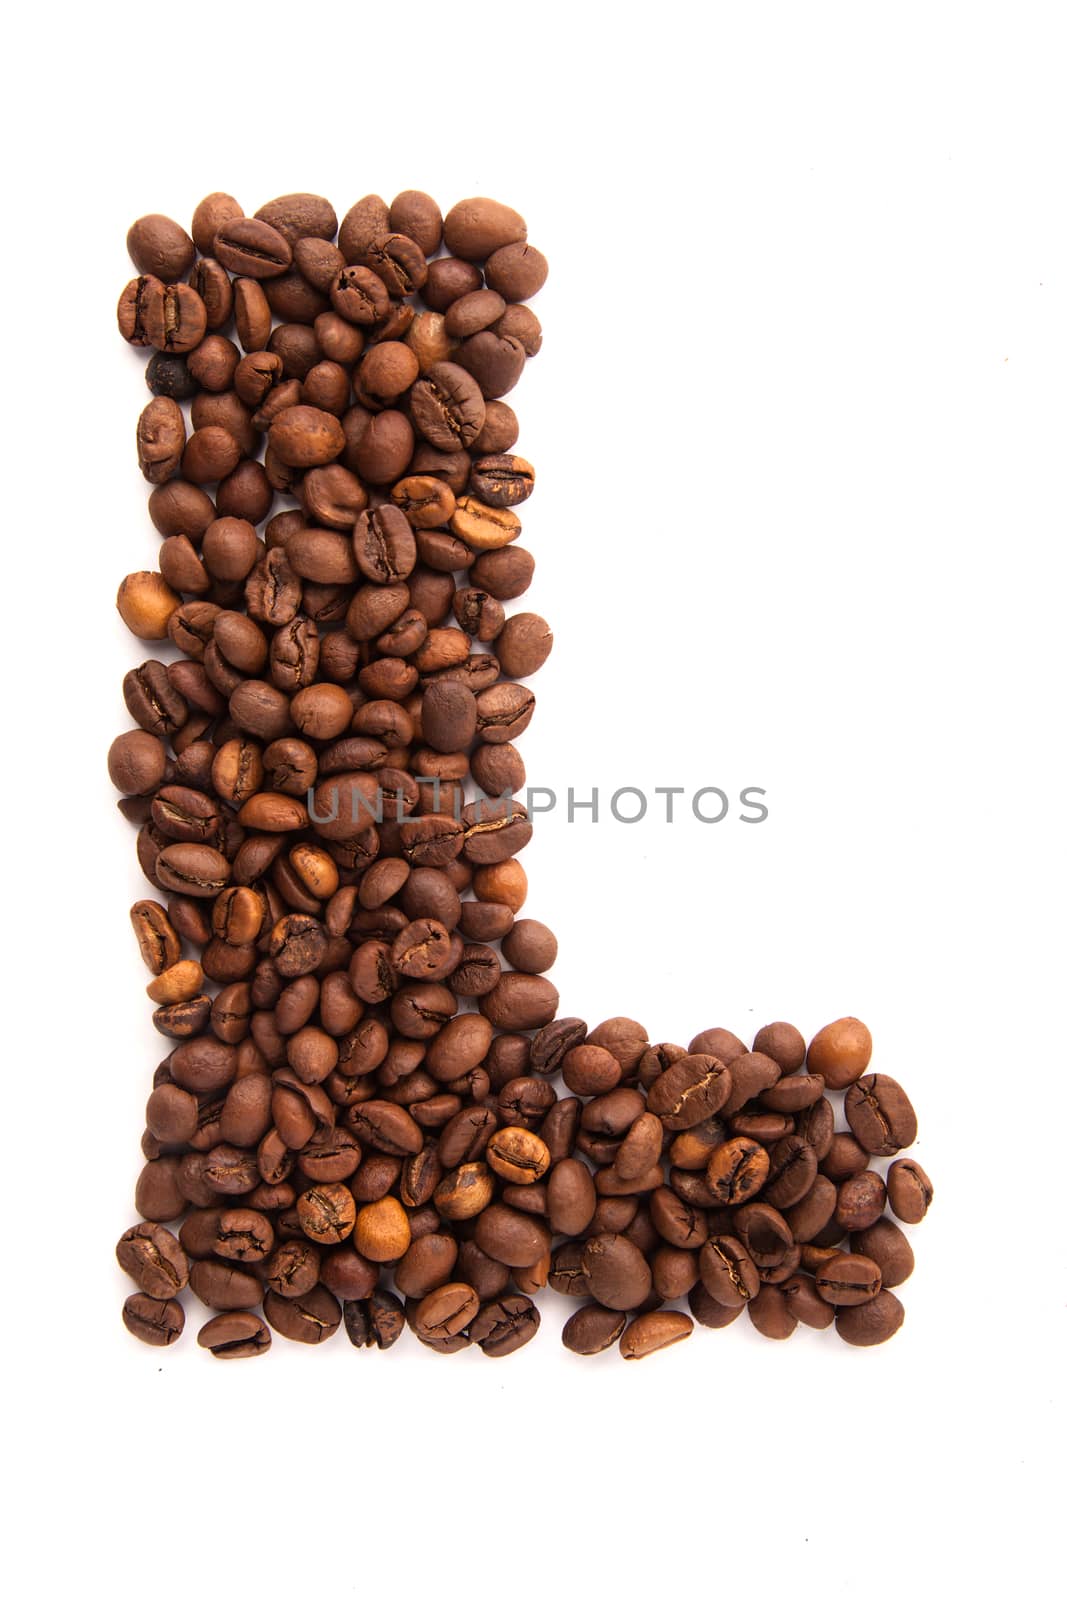 Alphabet letter L of roasted coffee beans isolated on white background by traza